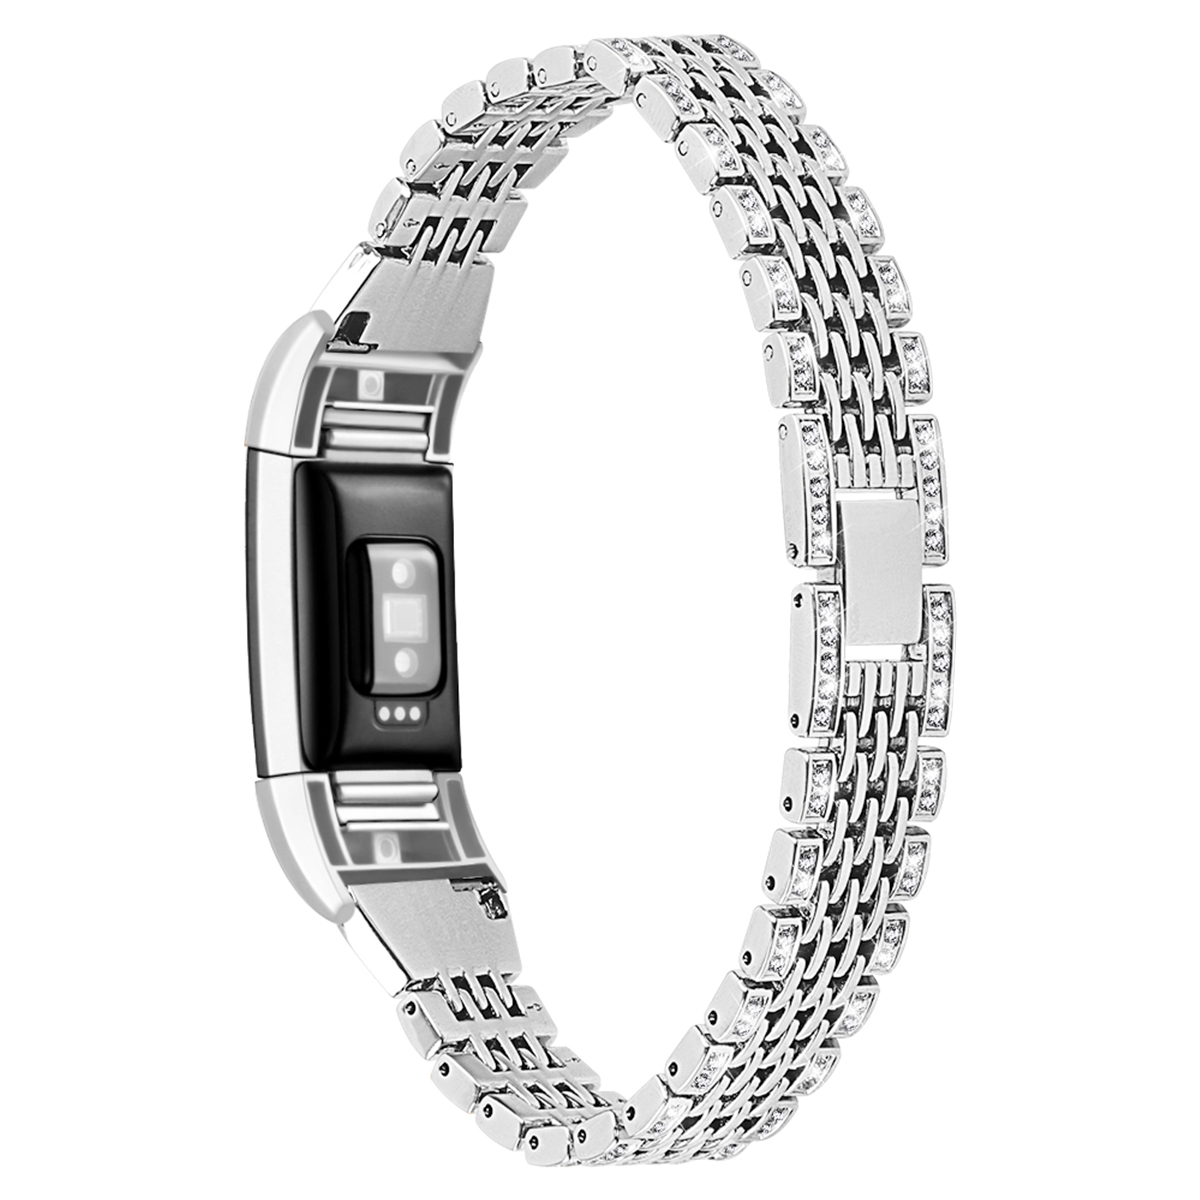 Luxury-Stainles-Steel-Watch-Band-Watch-Strap-Replacement-for-Fitbit-Charge-2-1534076-6